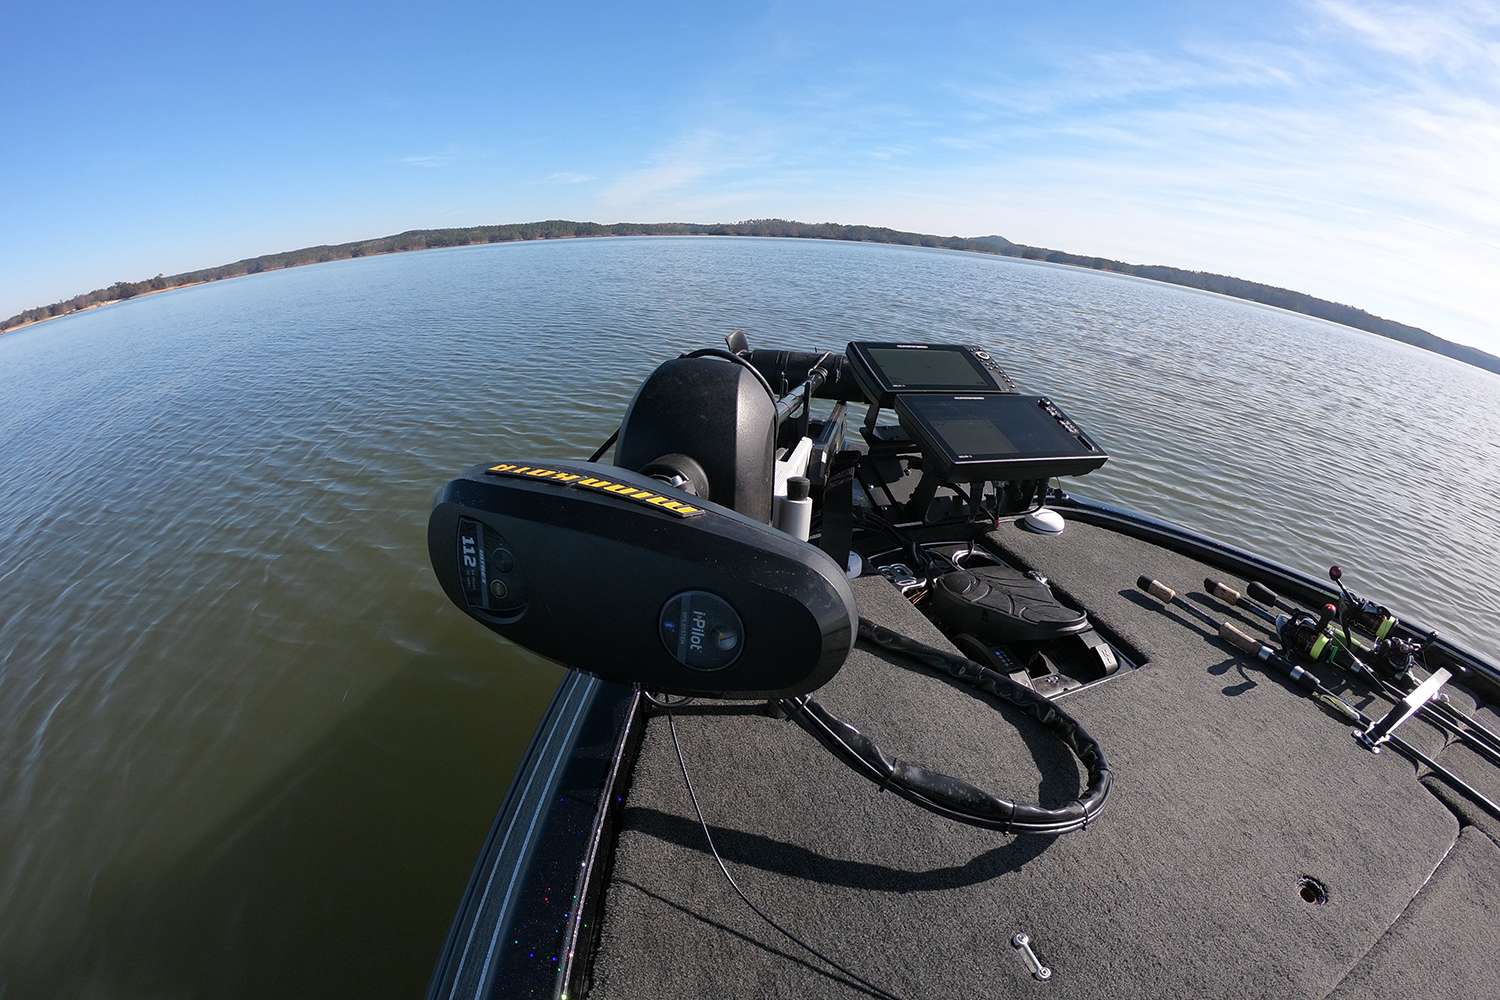 The Minn Kota Ultrex will be a major player at Lake Martin in February.